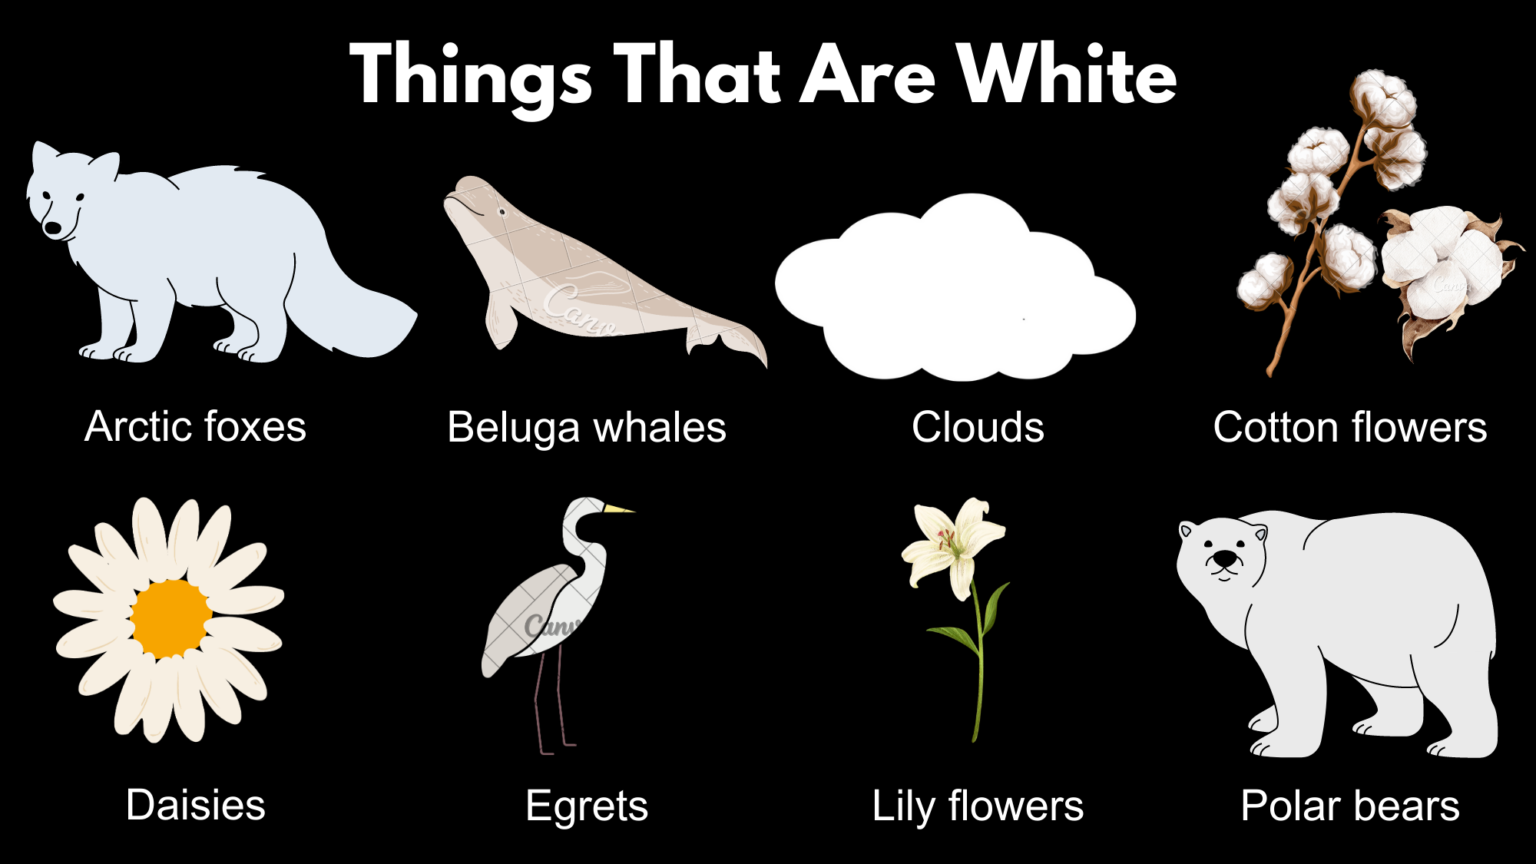 List of Things That Are White - GrammarVocab